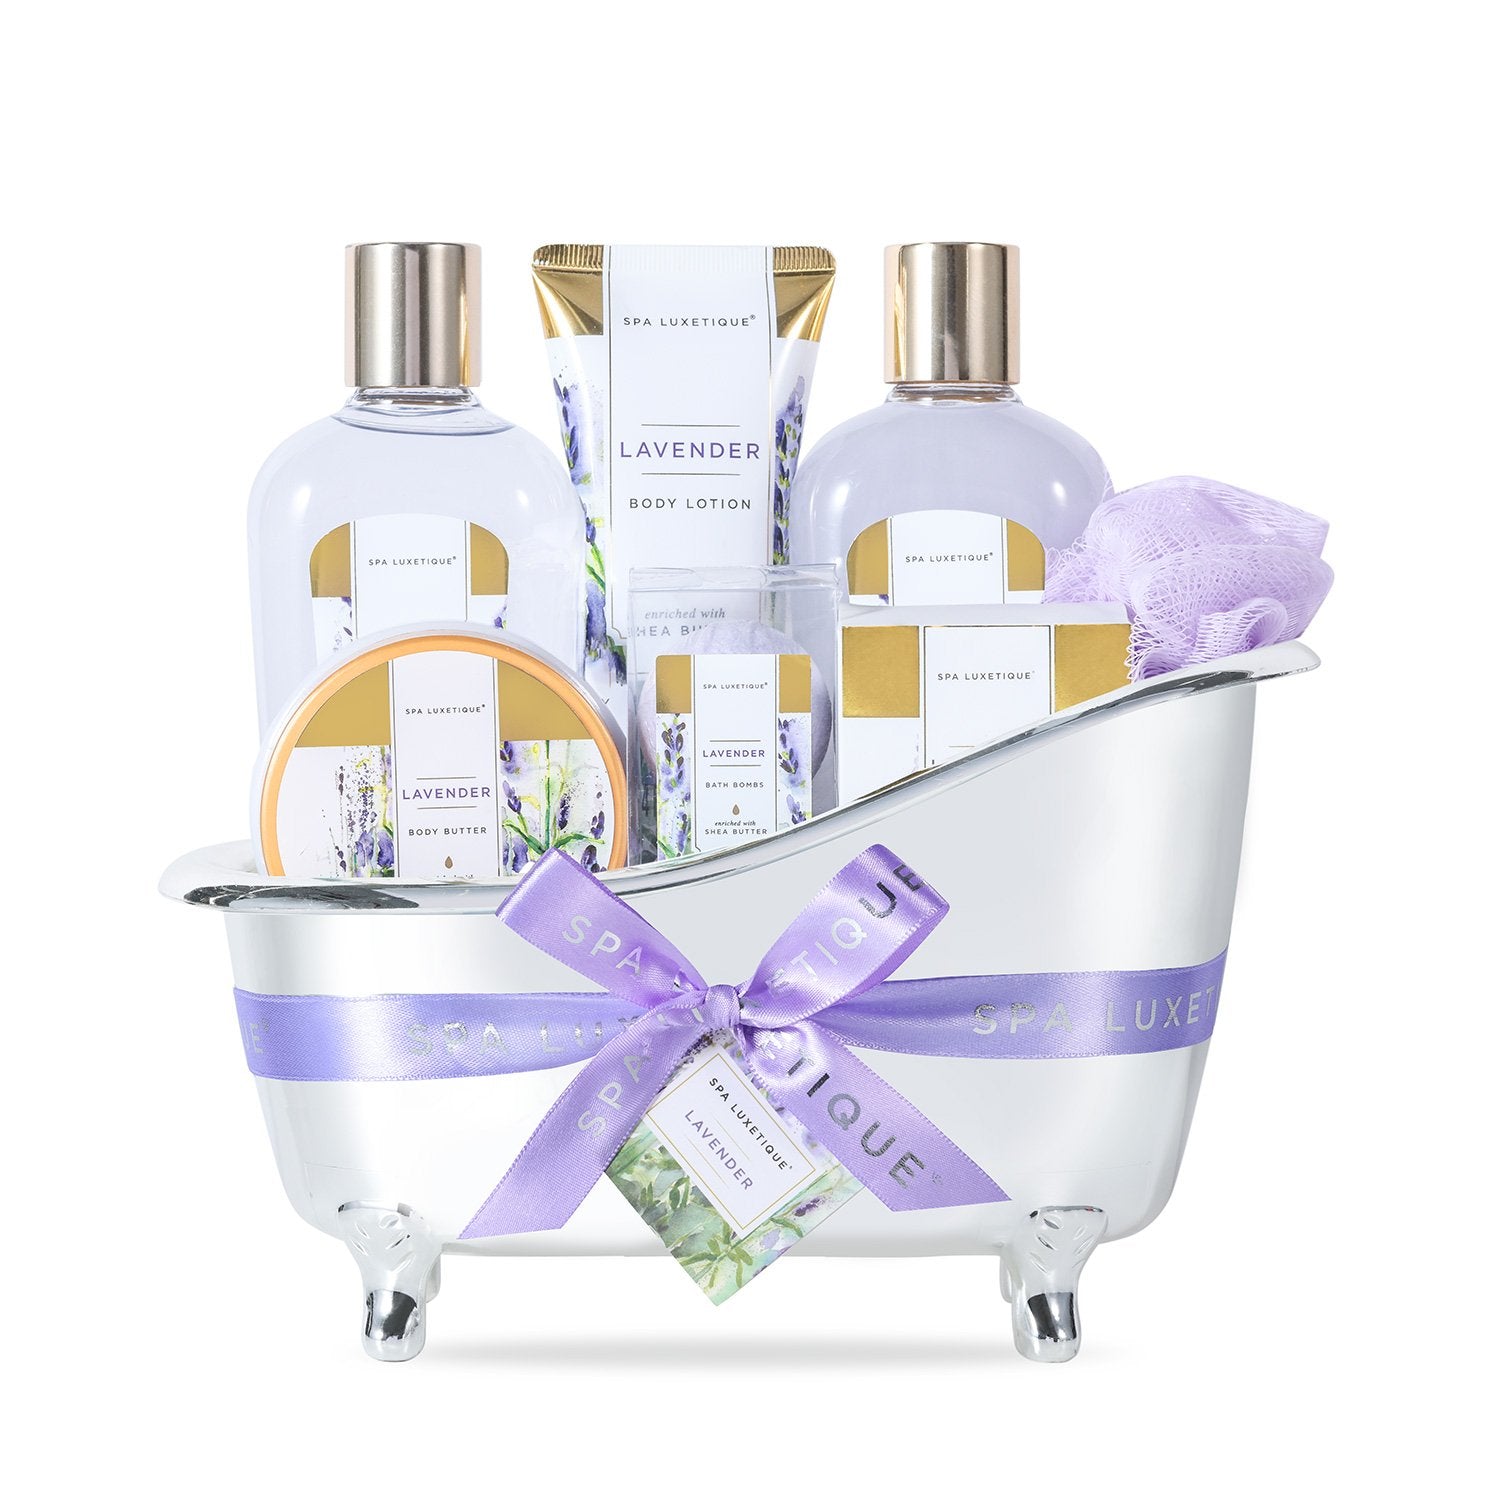  Spa Luxetique Spa Baskets for Women Gift, Gift Basket